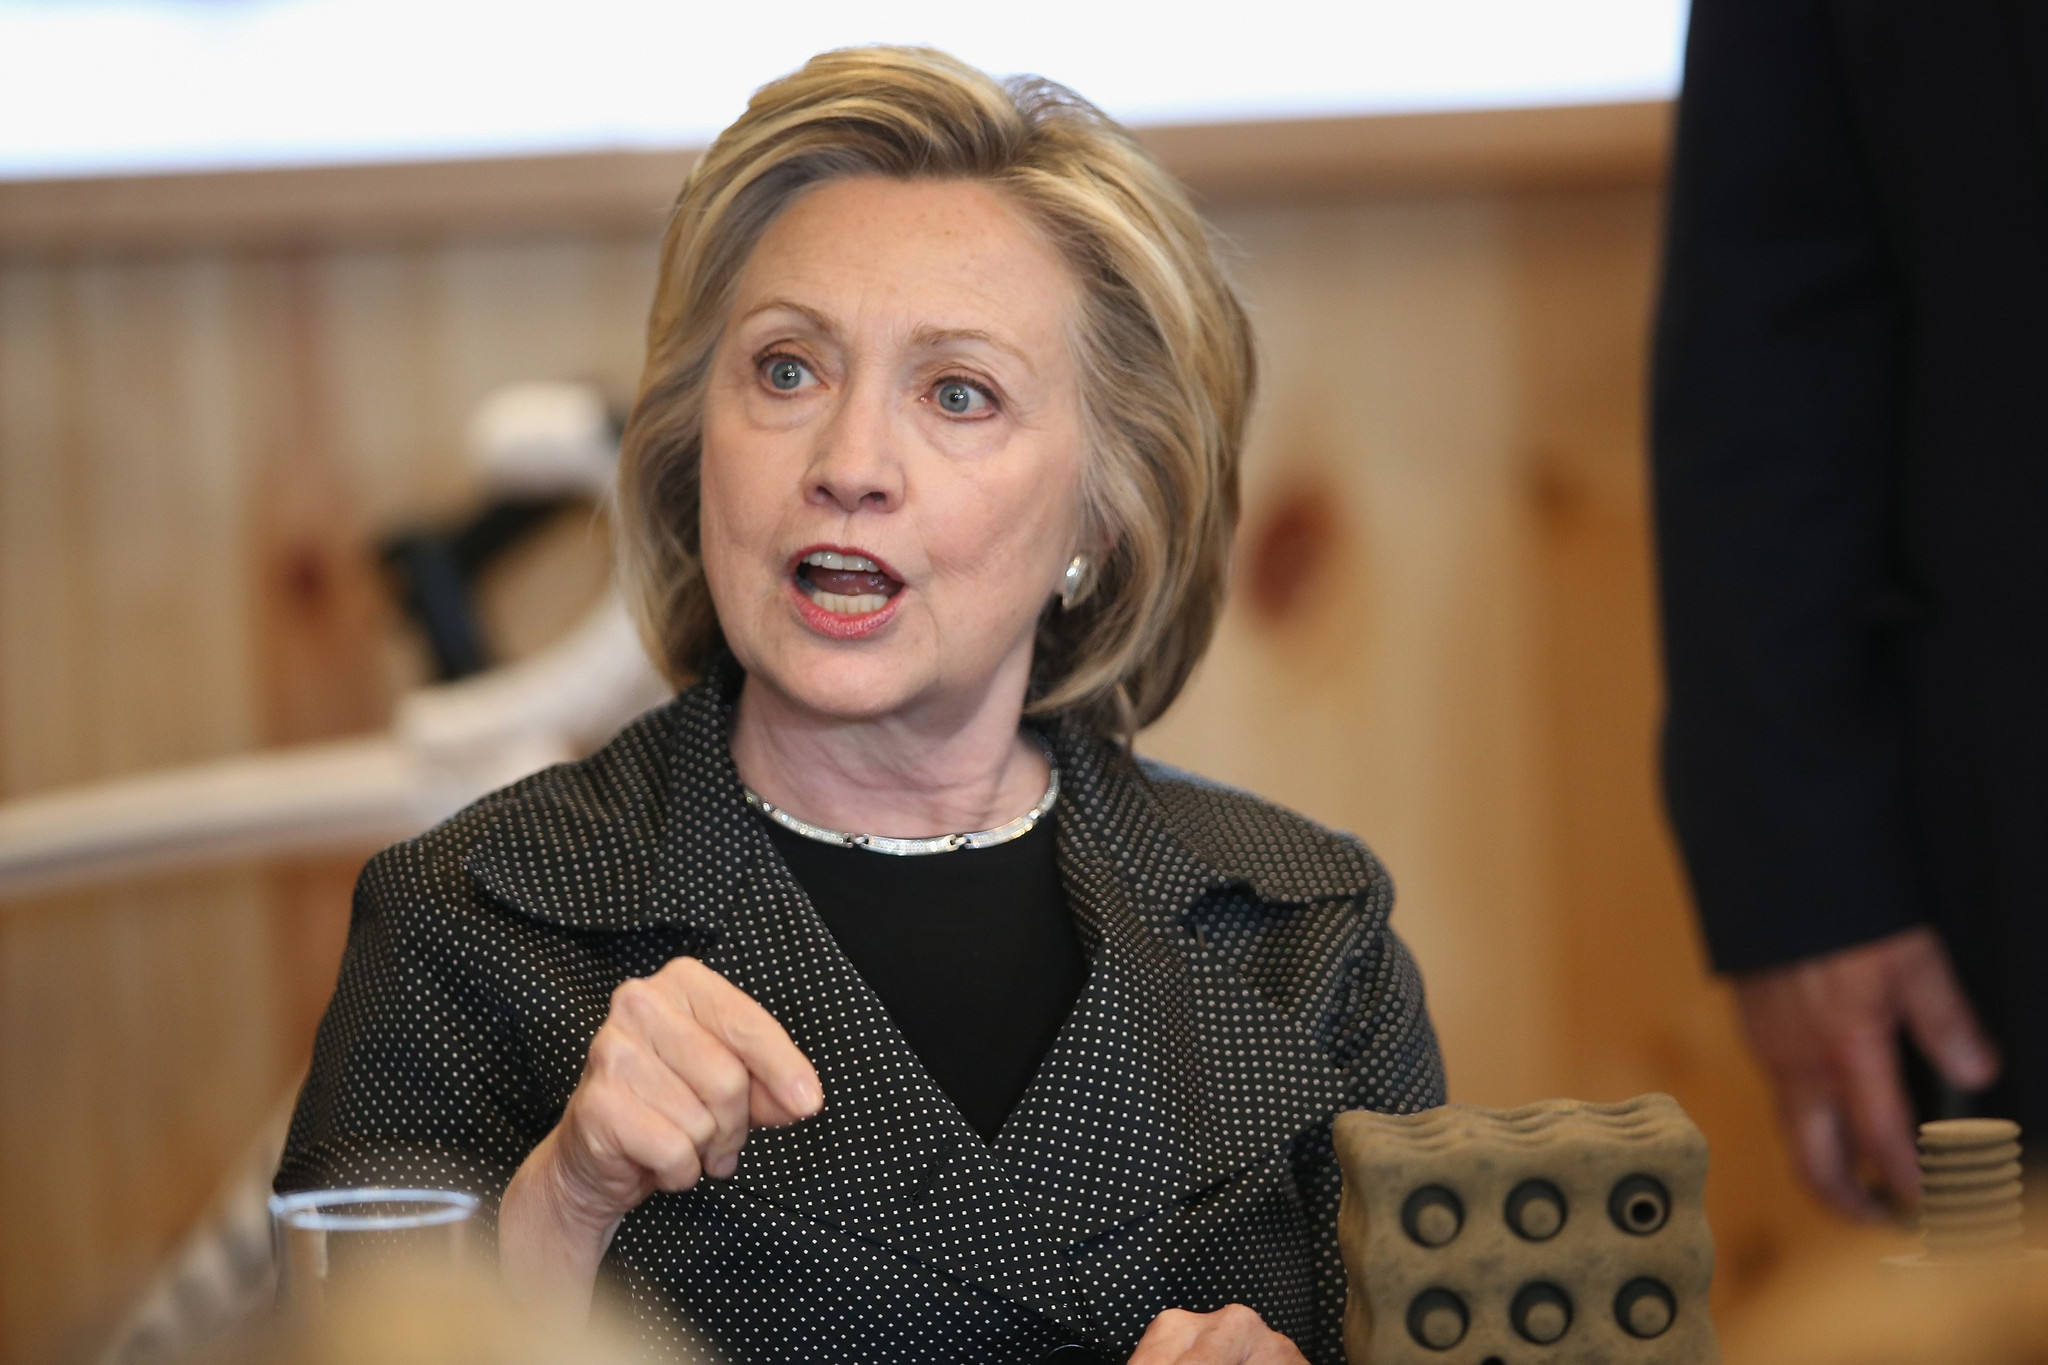 Clintons Benghazi emails show correspondence with adviser.